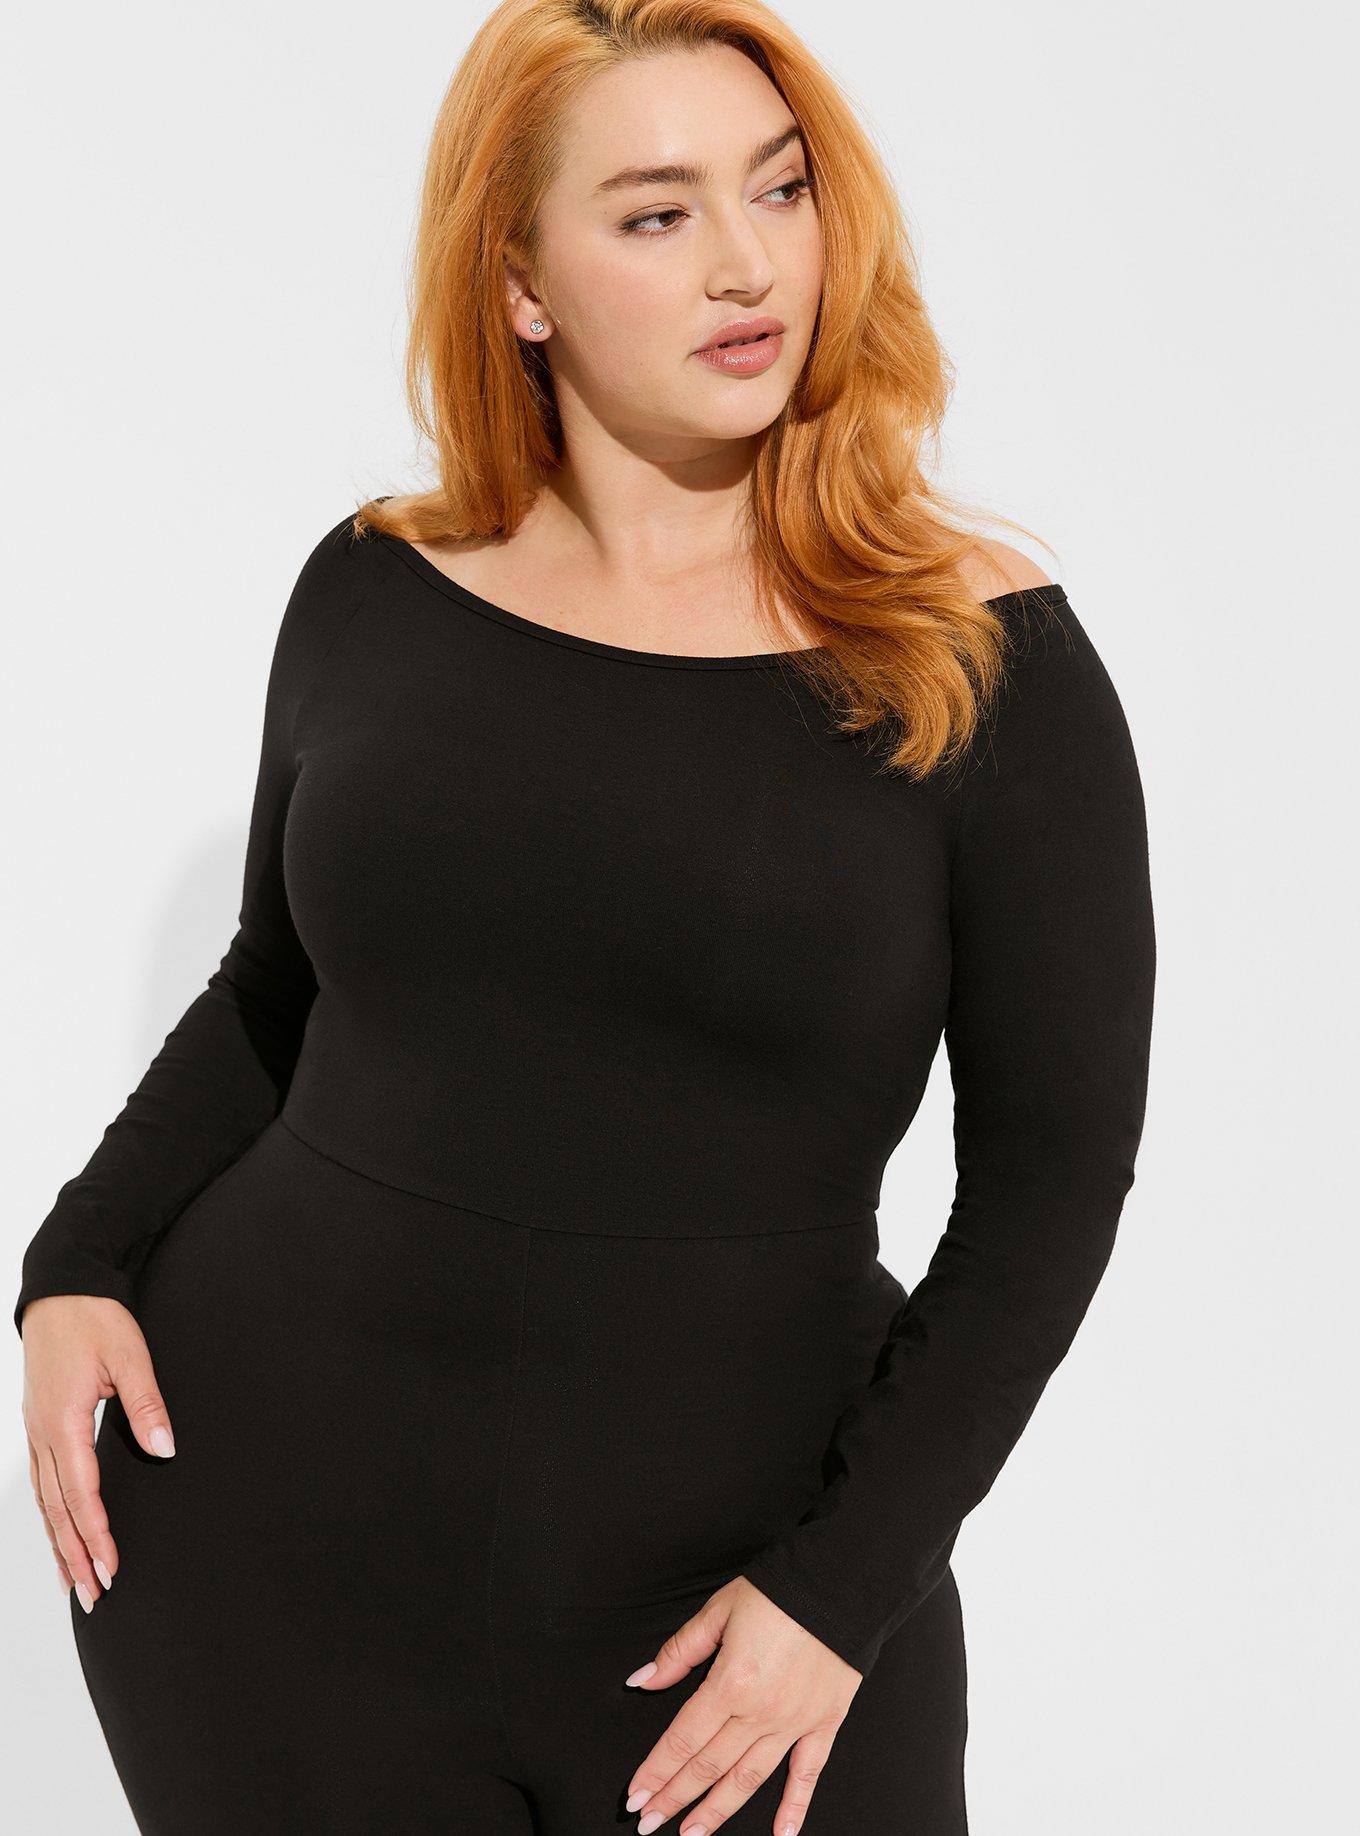 Seamless Catsuit by Intimately at Free People in Black, Size: L-XL/G-TG, £44.00